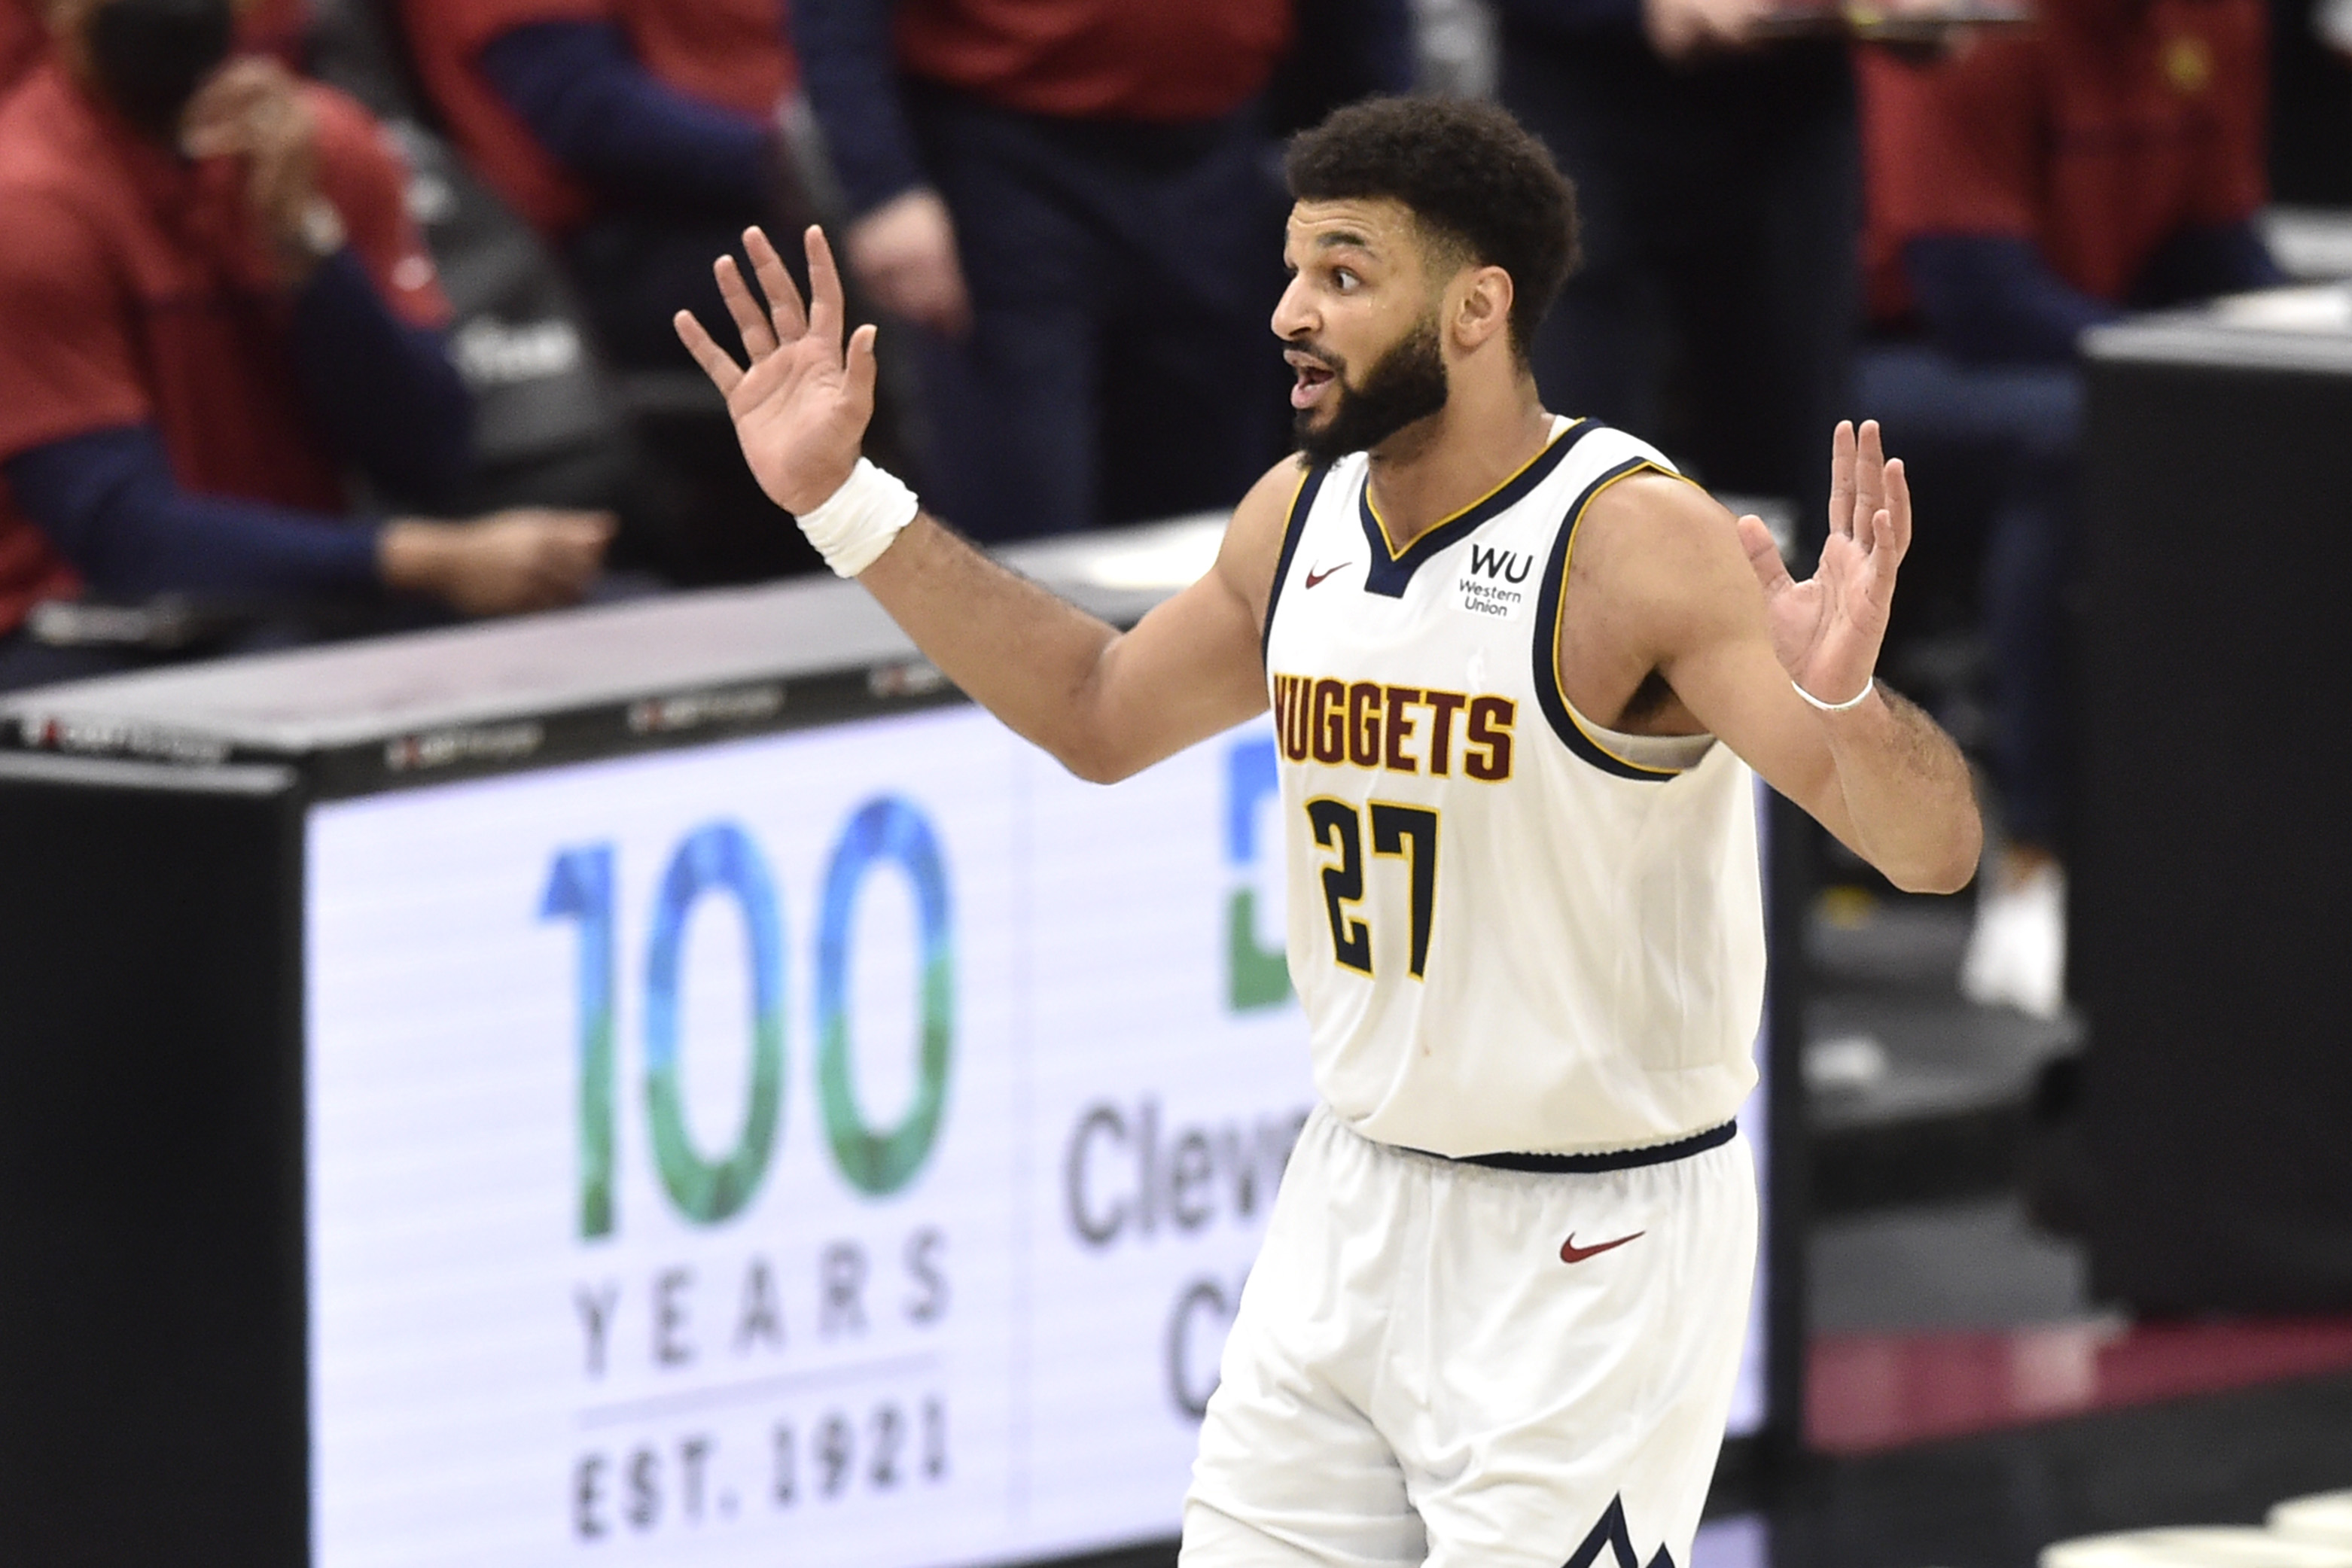 NBA: Denver Nuggets at Cleveland Cavaliers